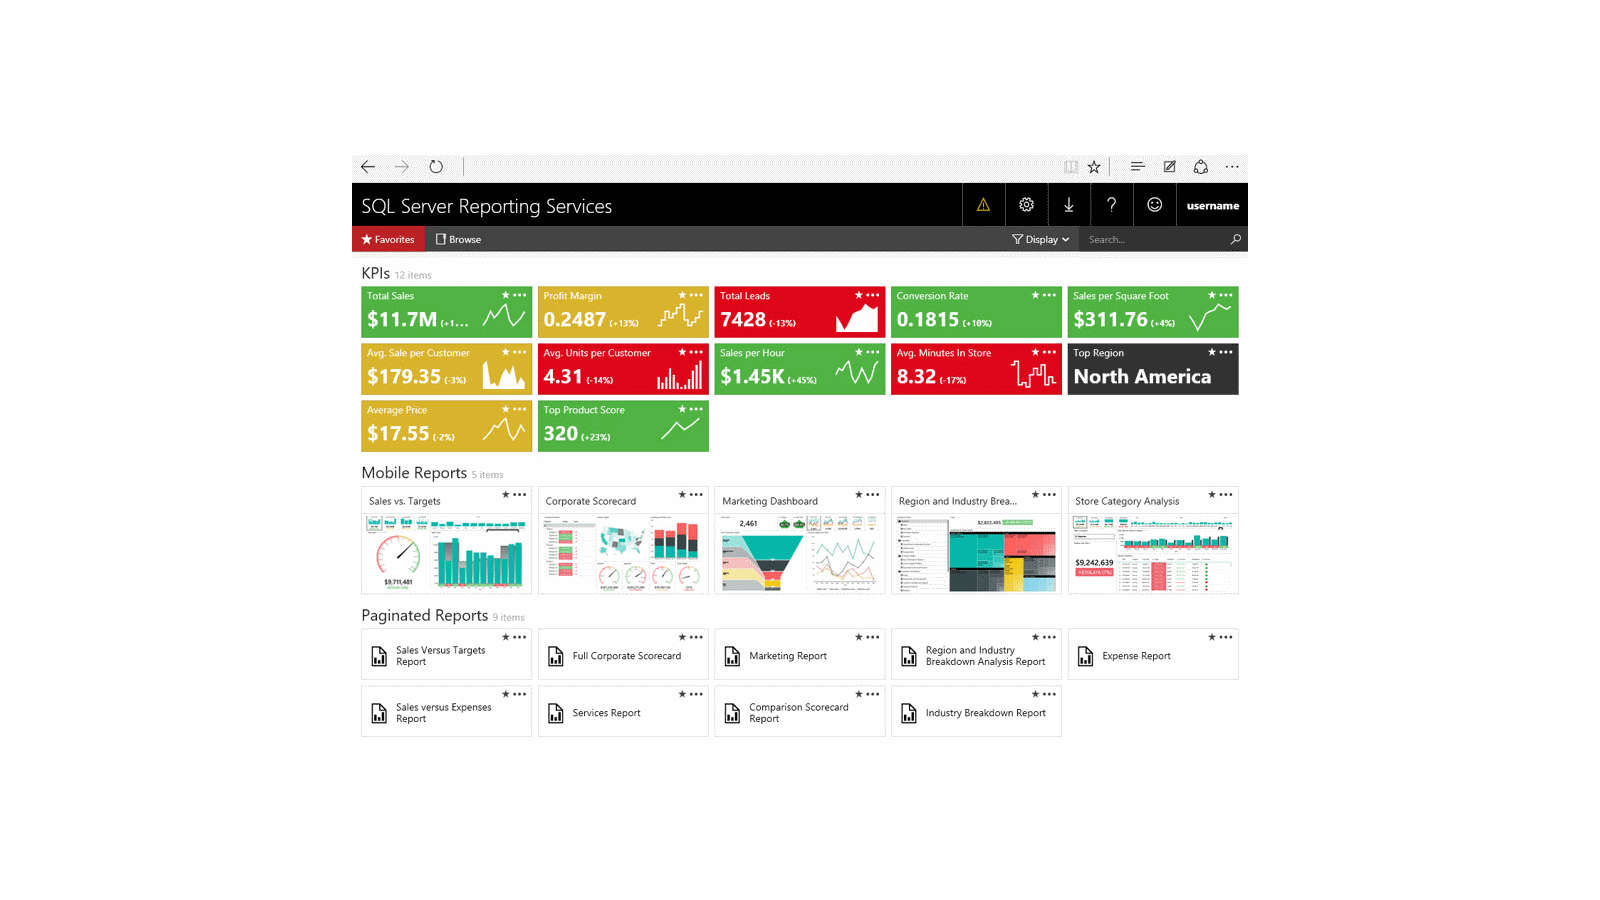 Dashboard: Overview